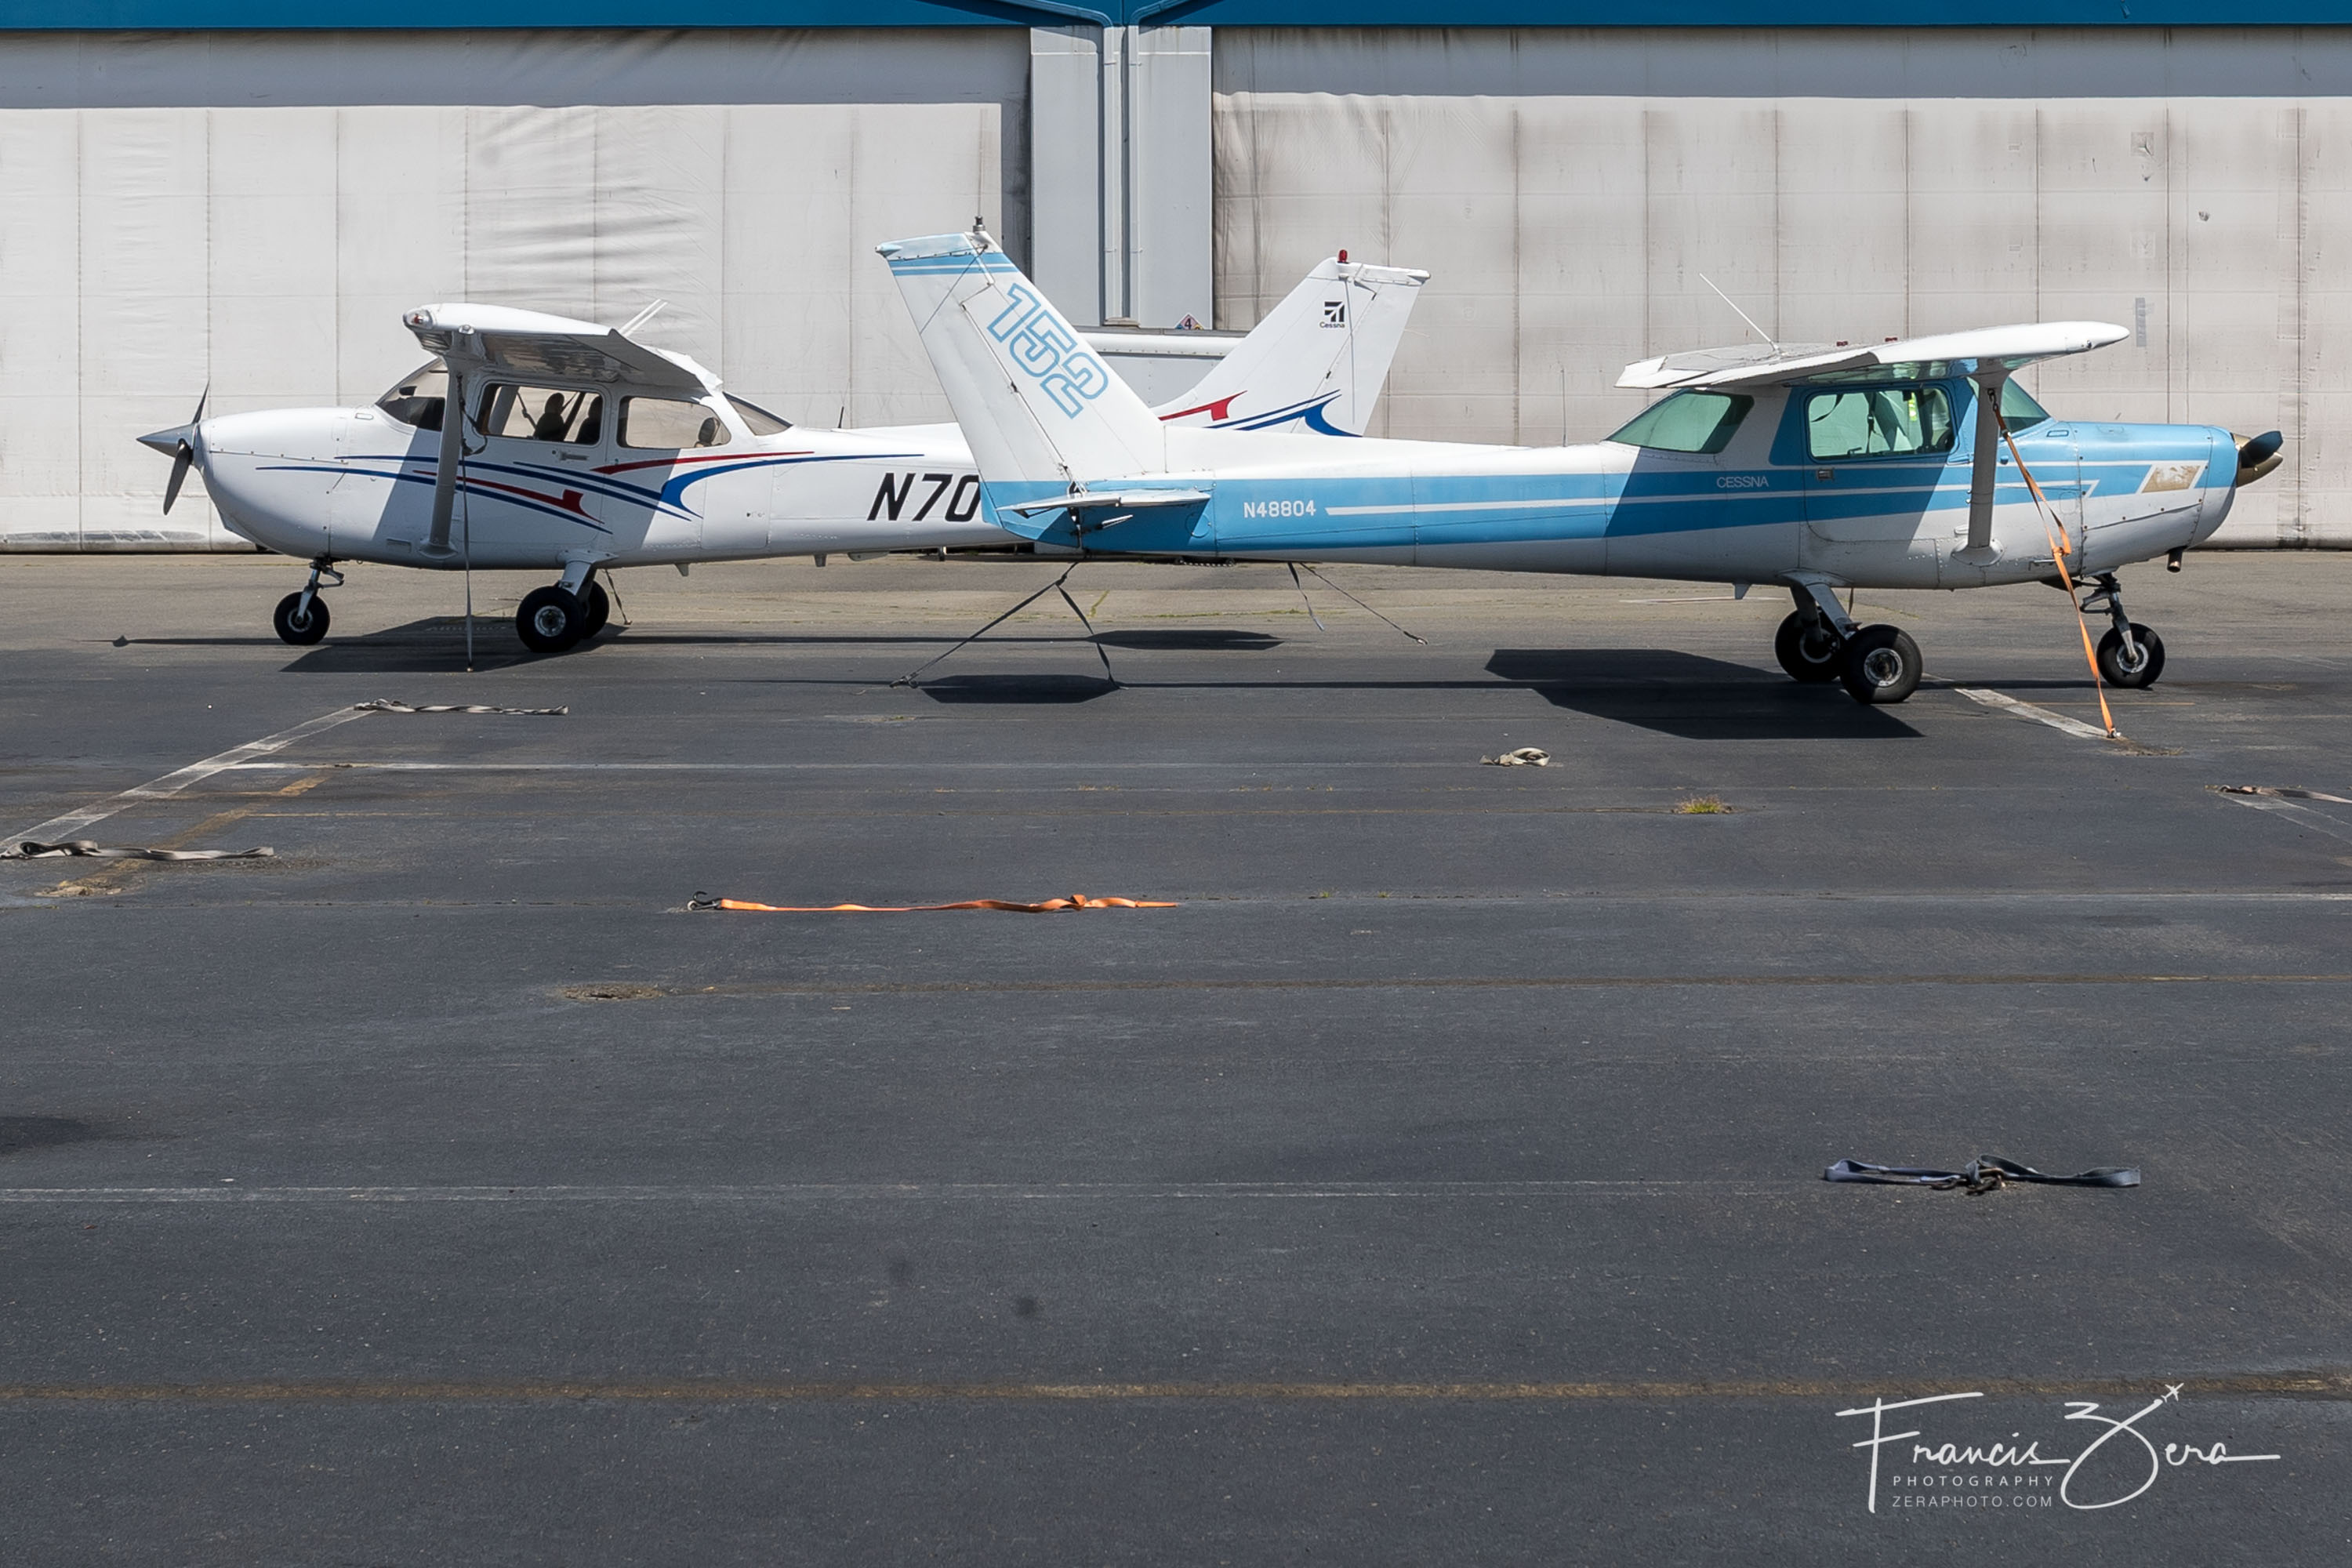 A two-seat Cessna 152 (foreground) and a four-seat Cessna 172 (background) on the Galvin ramp at BFI.